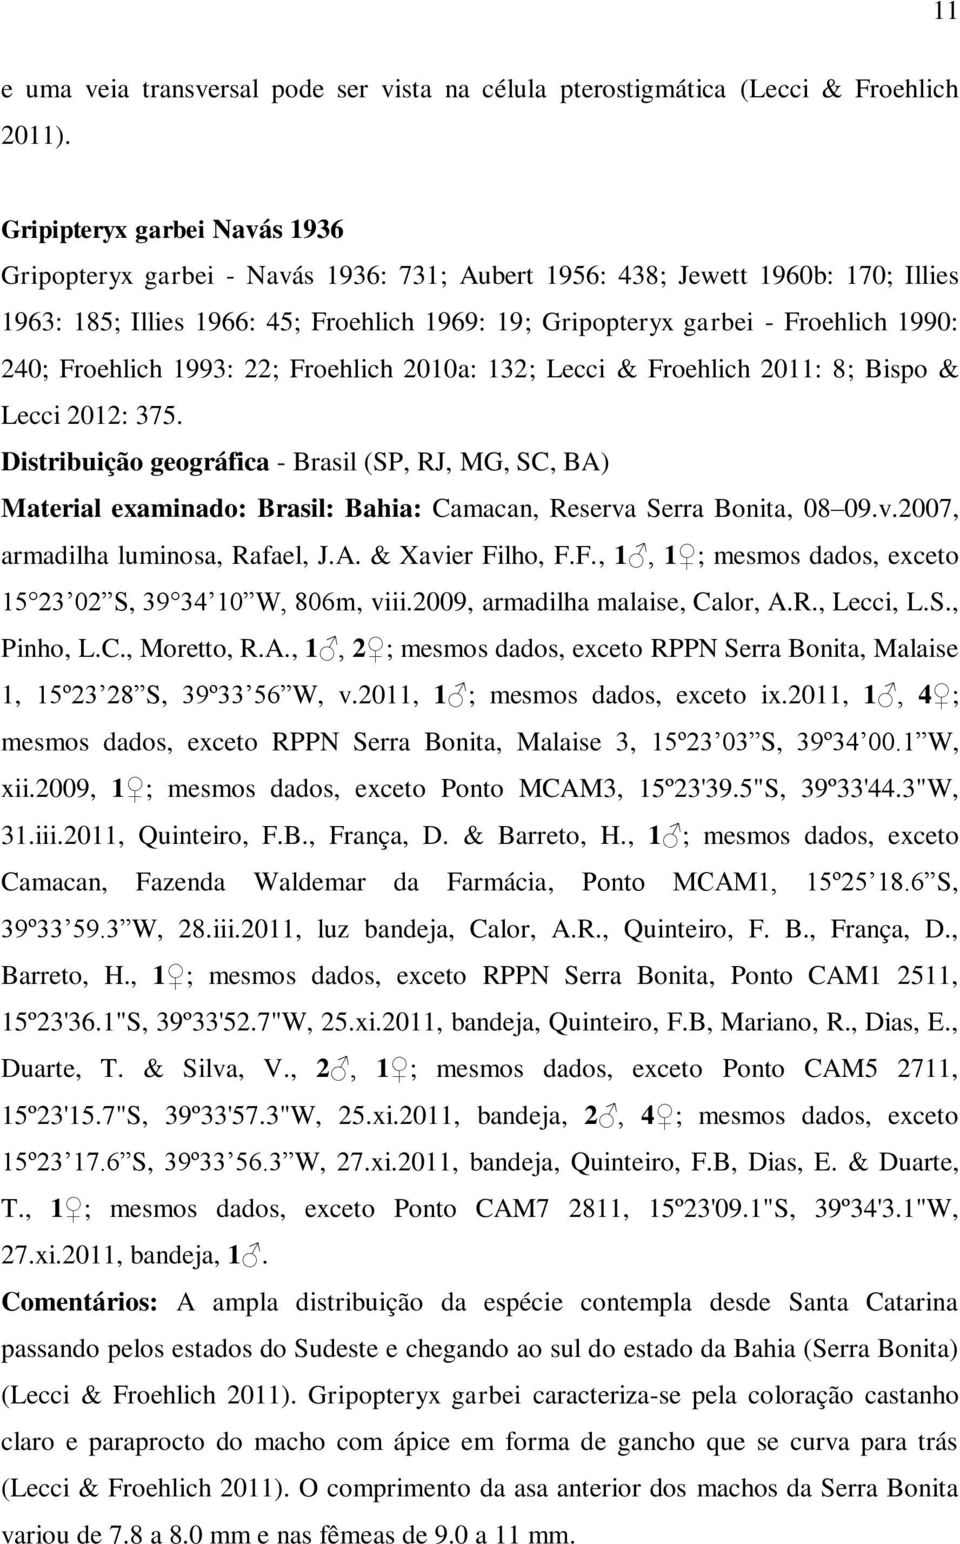 240; Froehlich 1993: 22; Froehlich 2010a: 132; Lecci & Froehlich 2011: 8; Bispo & Lecci 2012: 375.